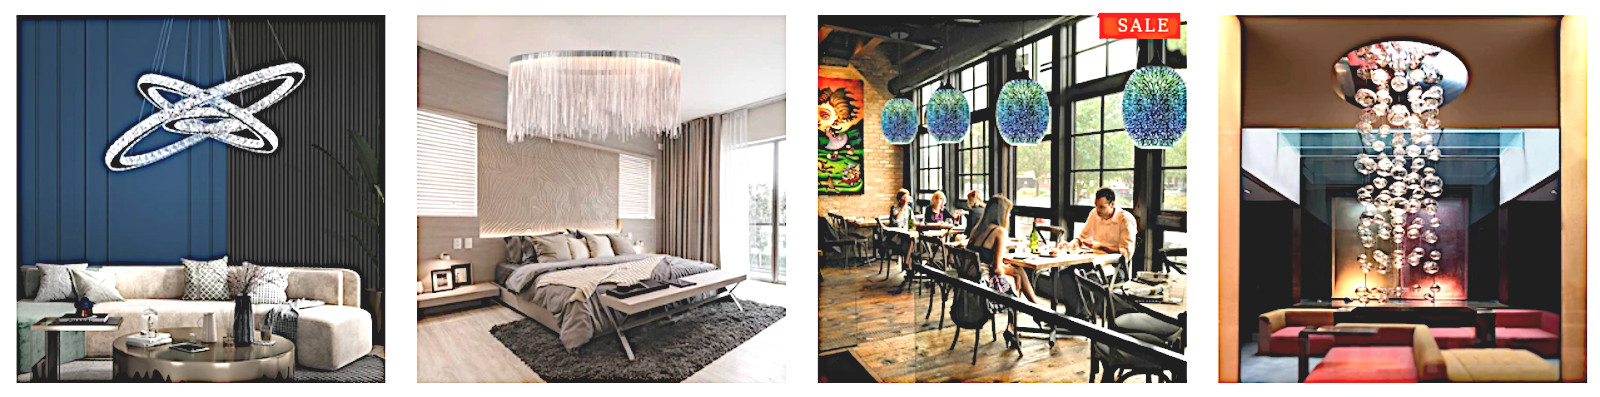 contemporary chandeliers cost-effective